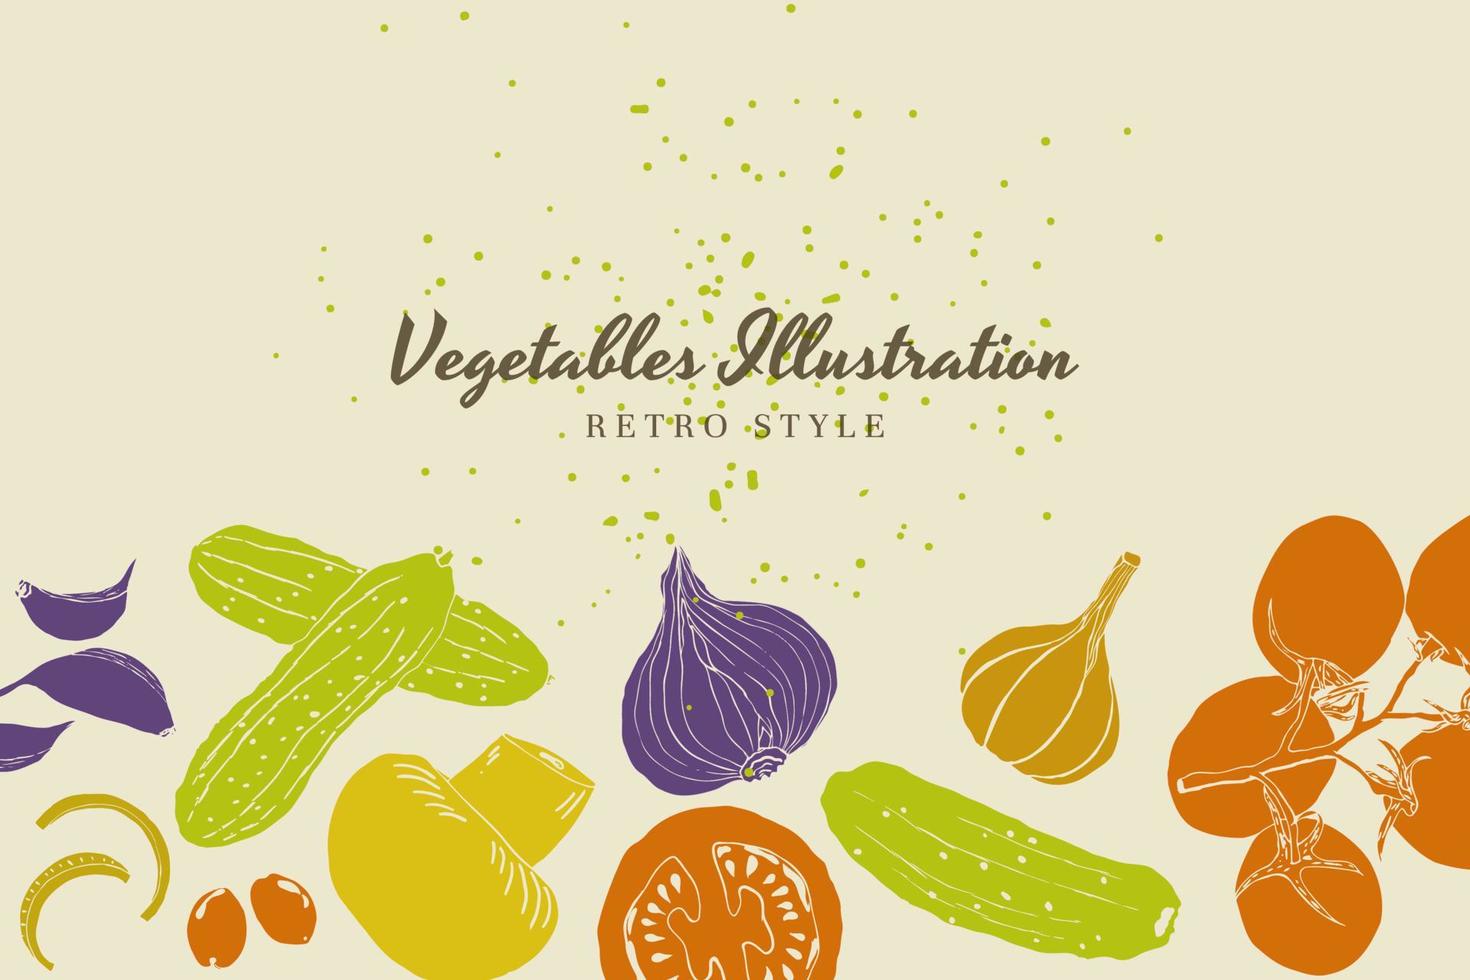 Vegetables illustration background hand drawn retro colors style vector